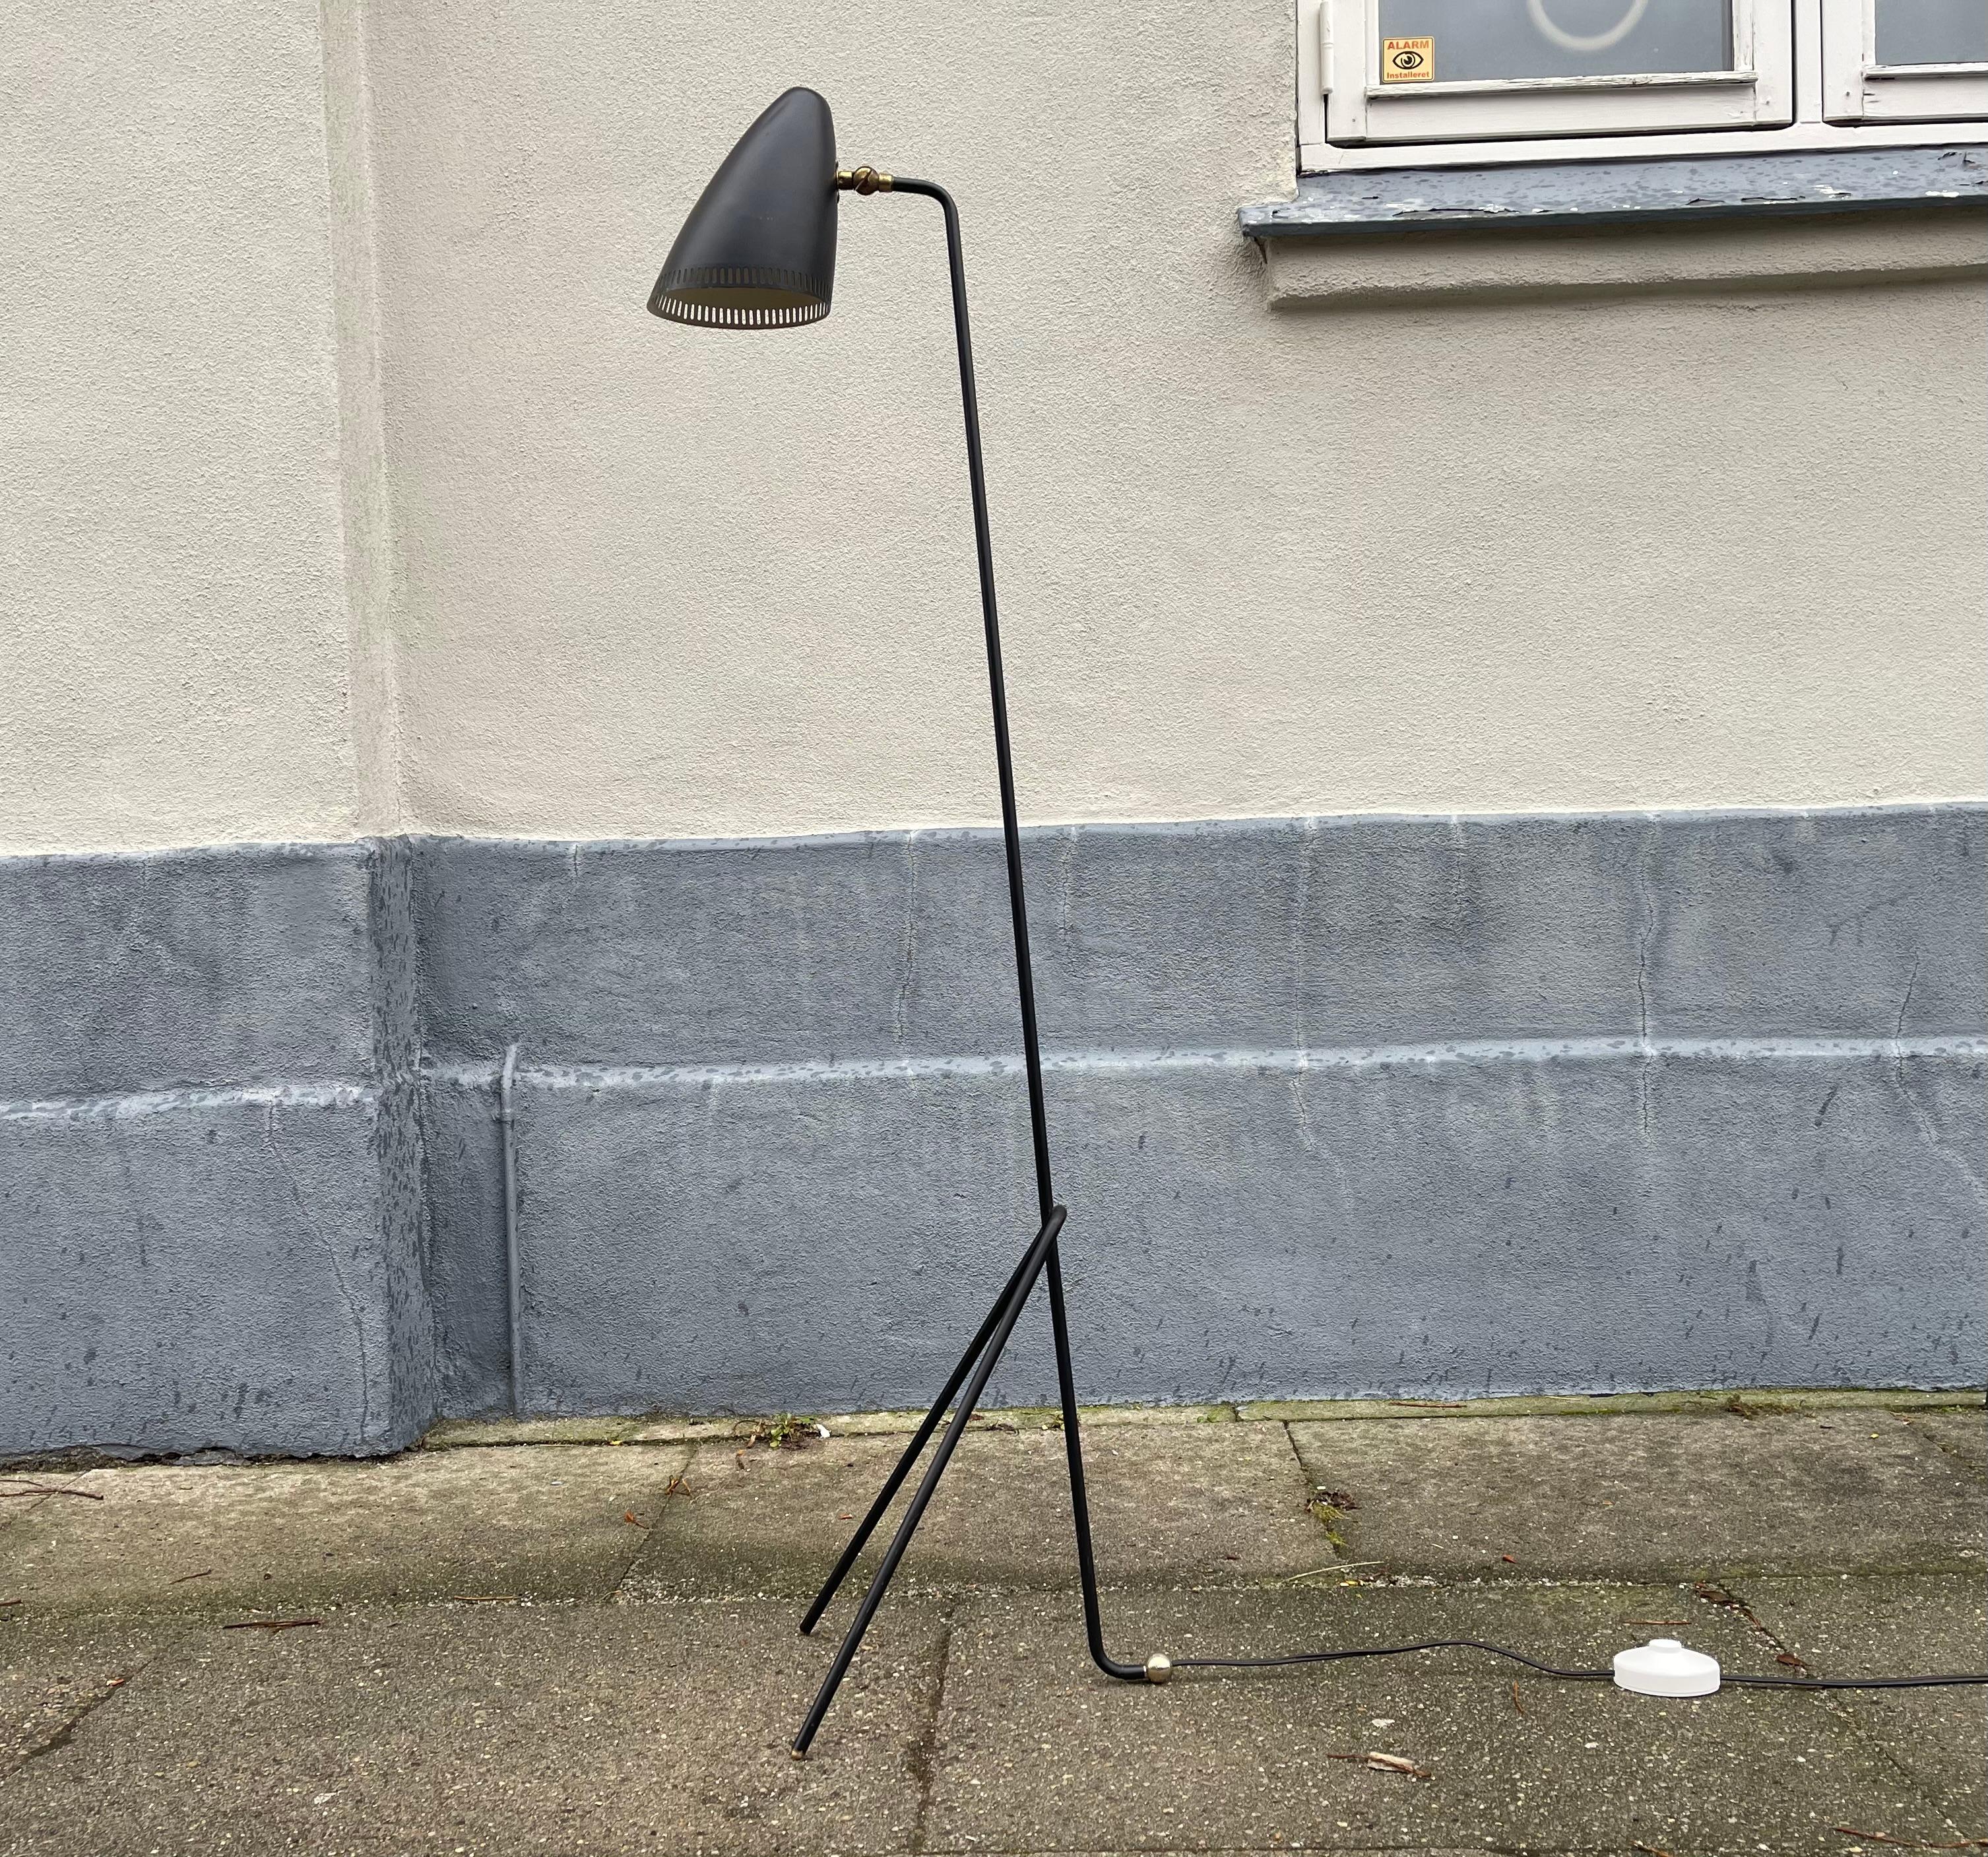 A rare configuration of the black Giraffe Floor lamp by Svend Aage Holm-Sørensen. It is light design executed in Lacquered aluminum with brass accent. It features a vertically perforated shade with white reflective interior that's adjustable up/down